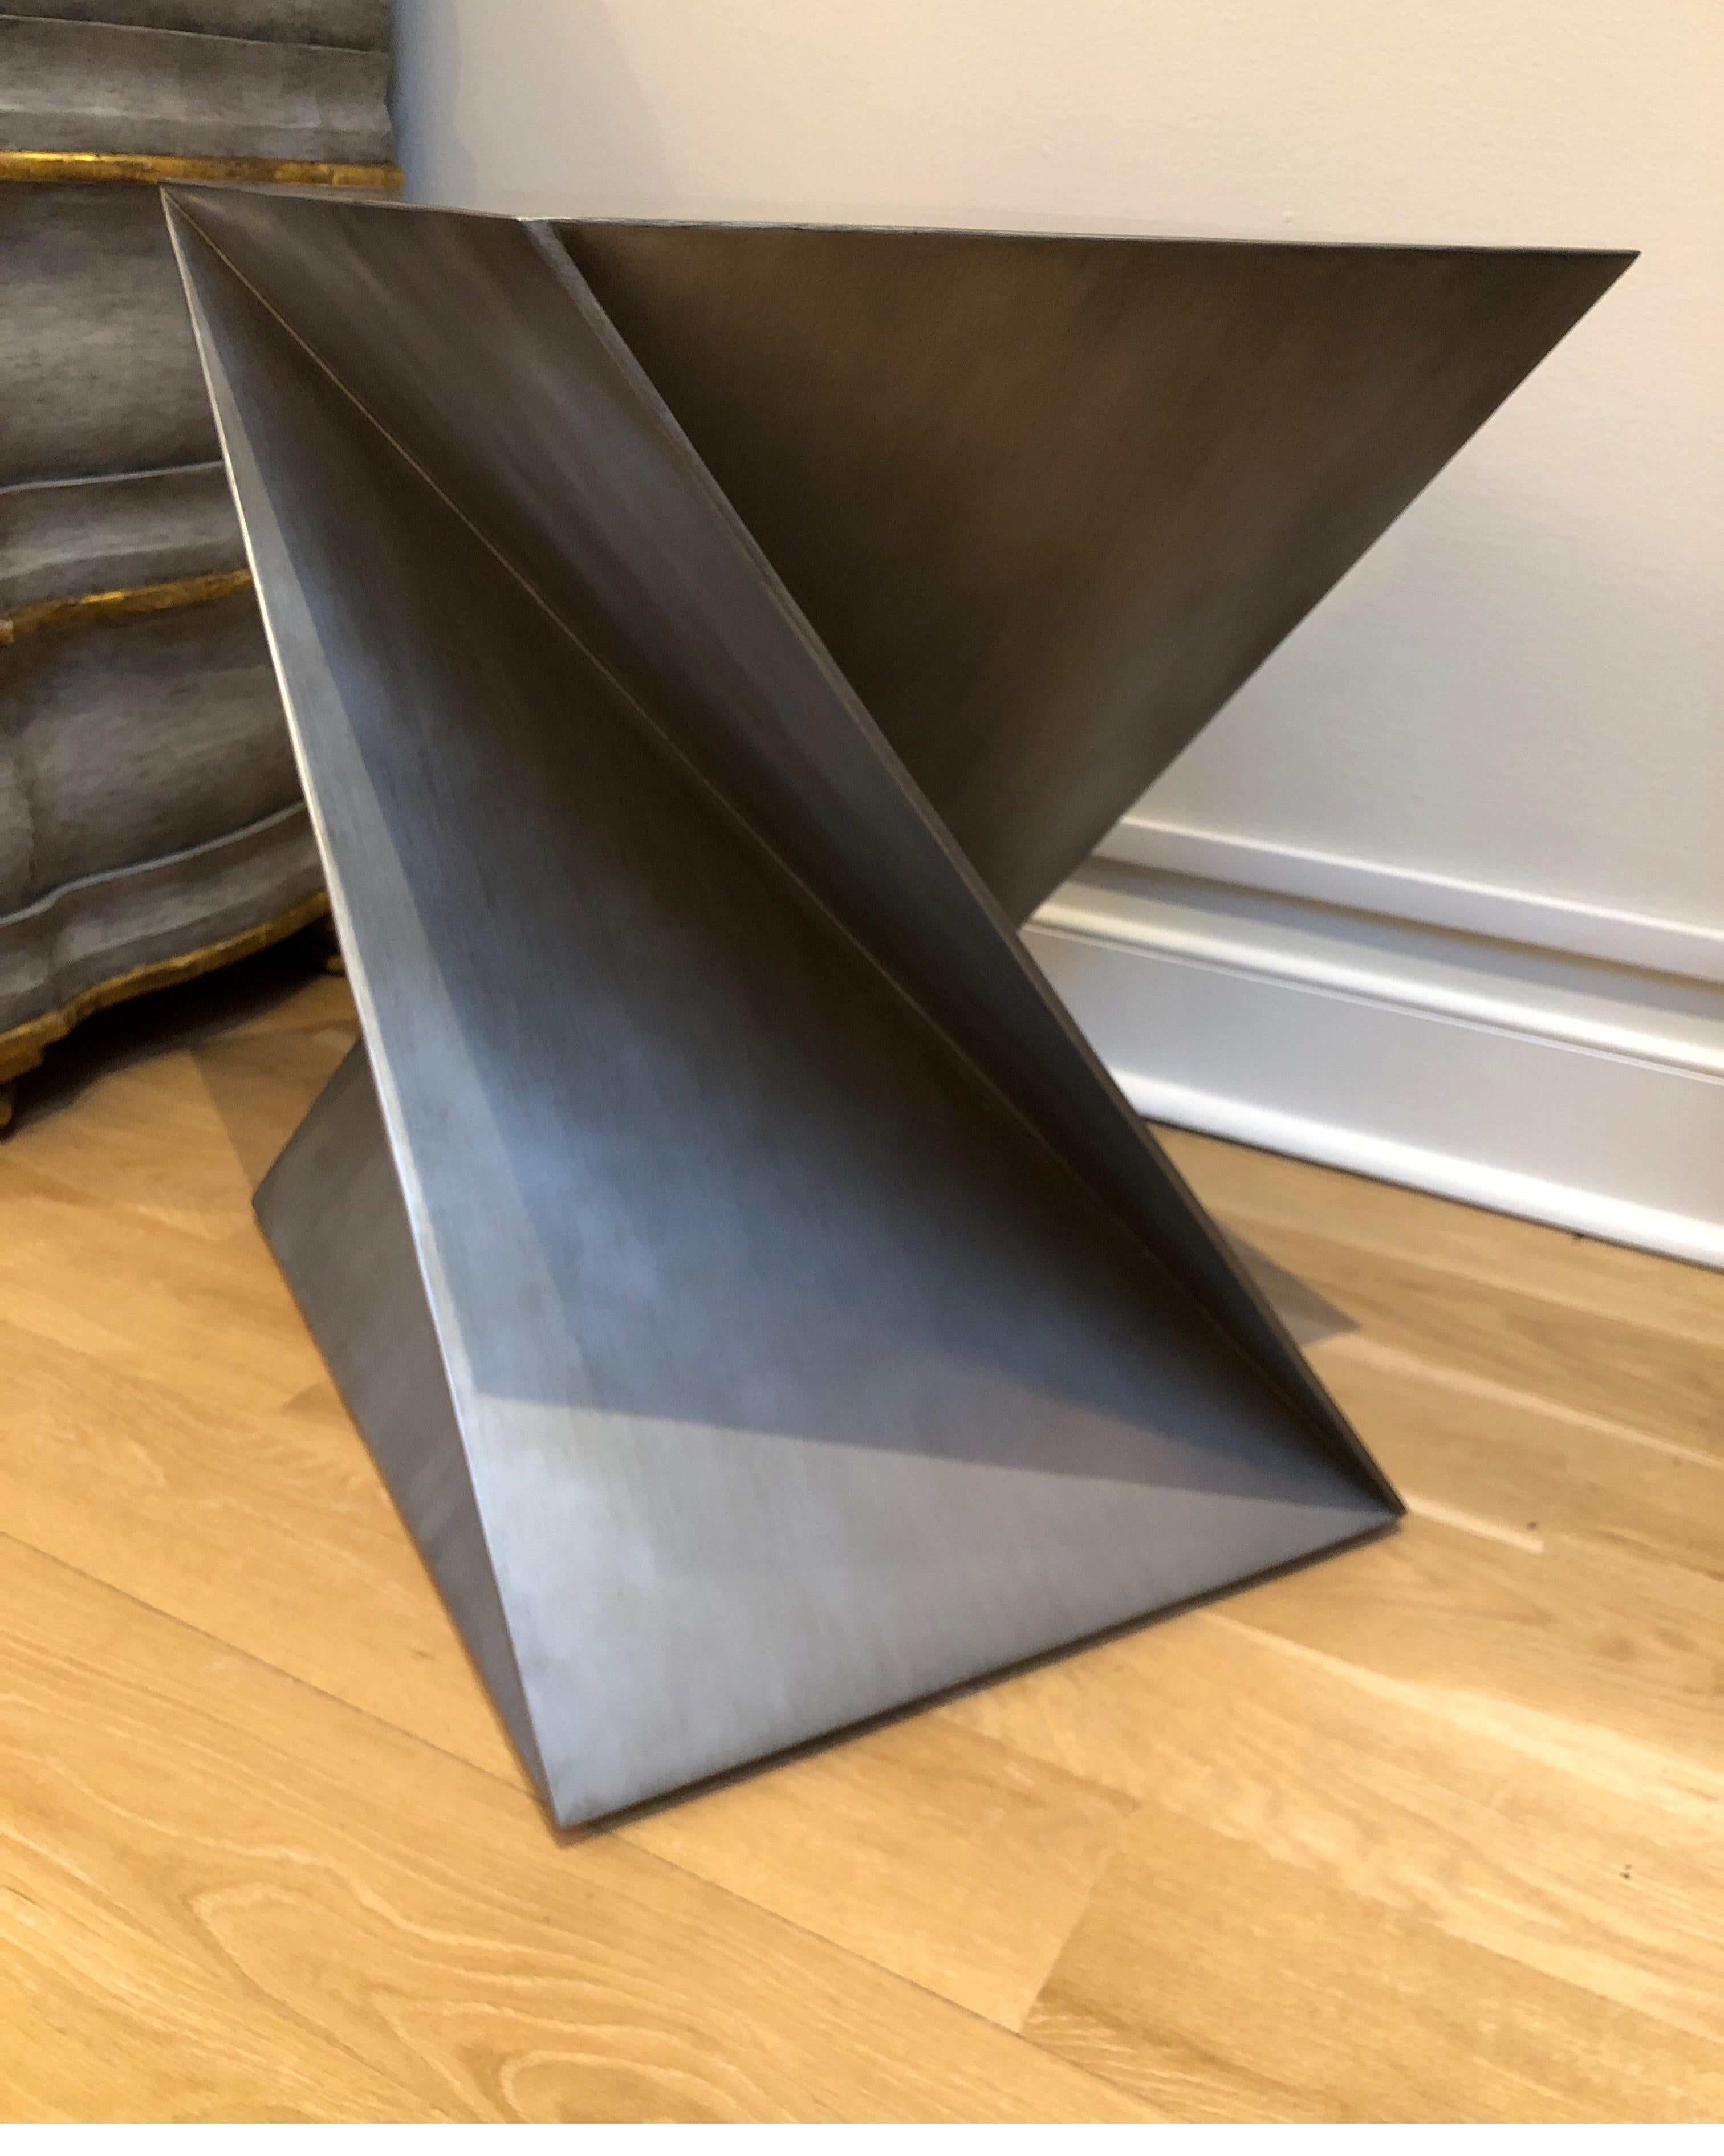 Solid metal contemporary side table with geometric shape.
Perfect condition.
Style of Mathieu Mategot.